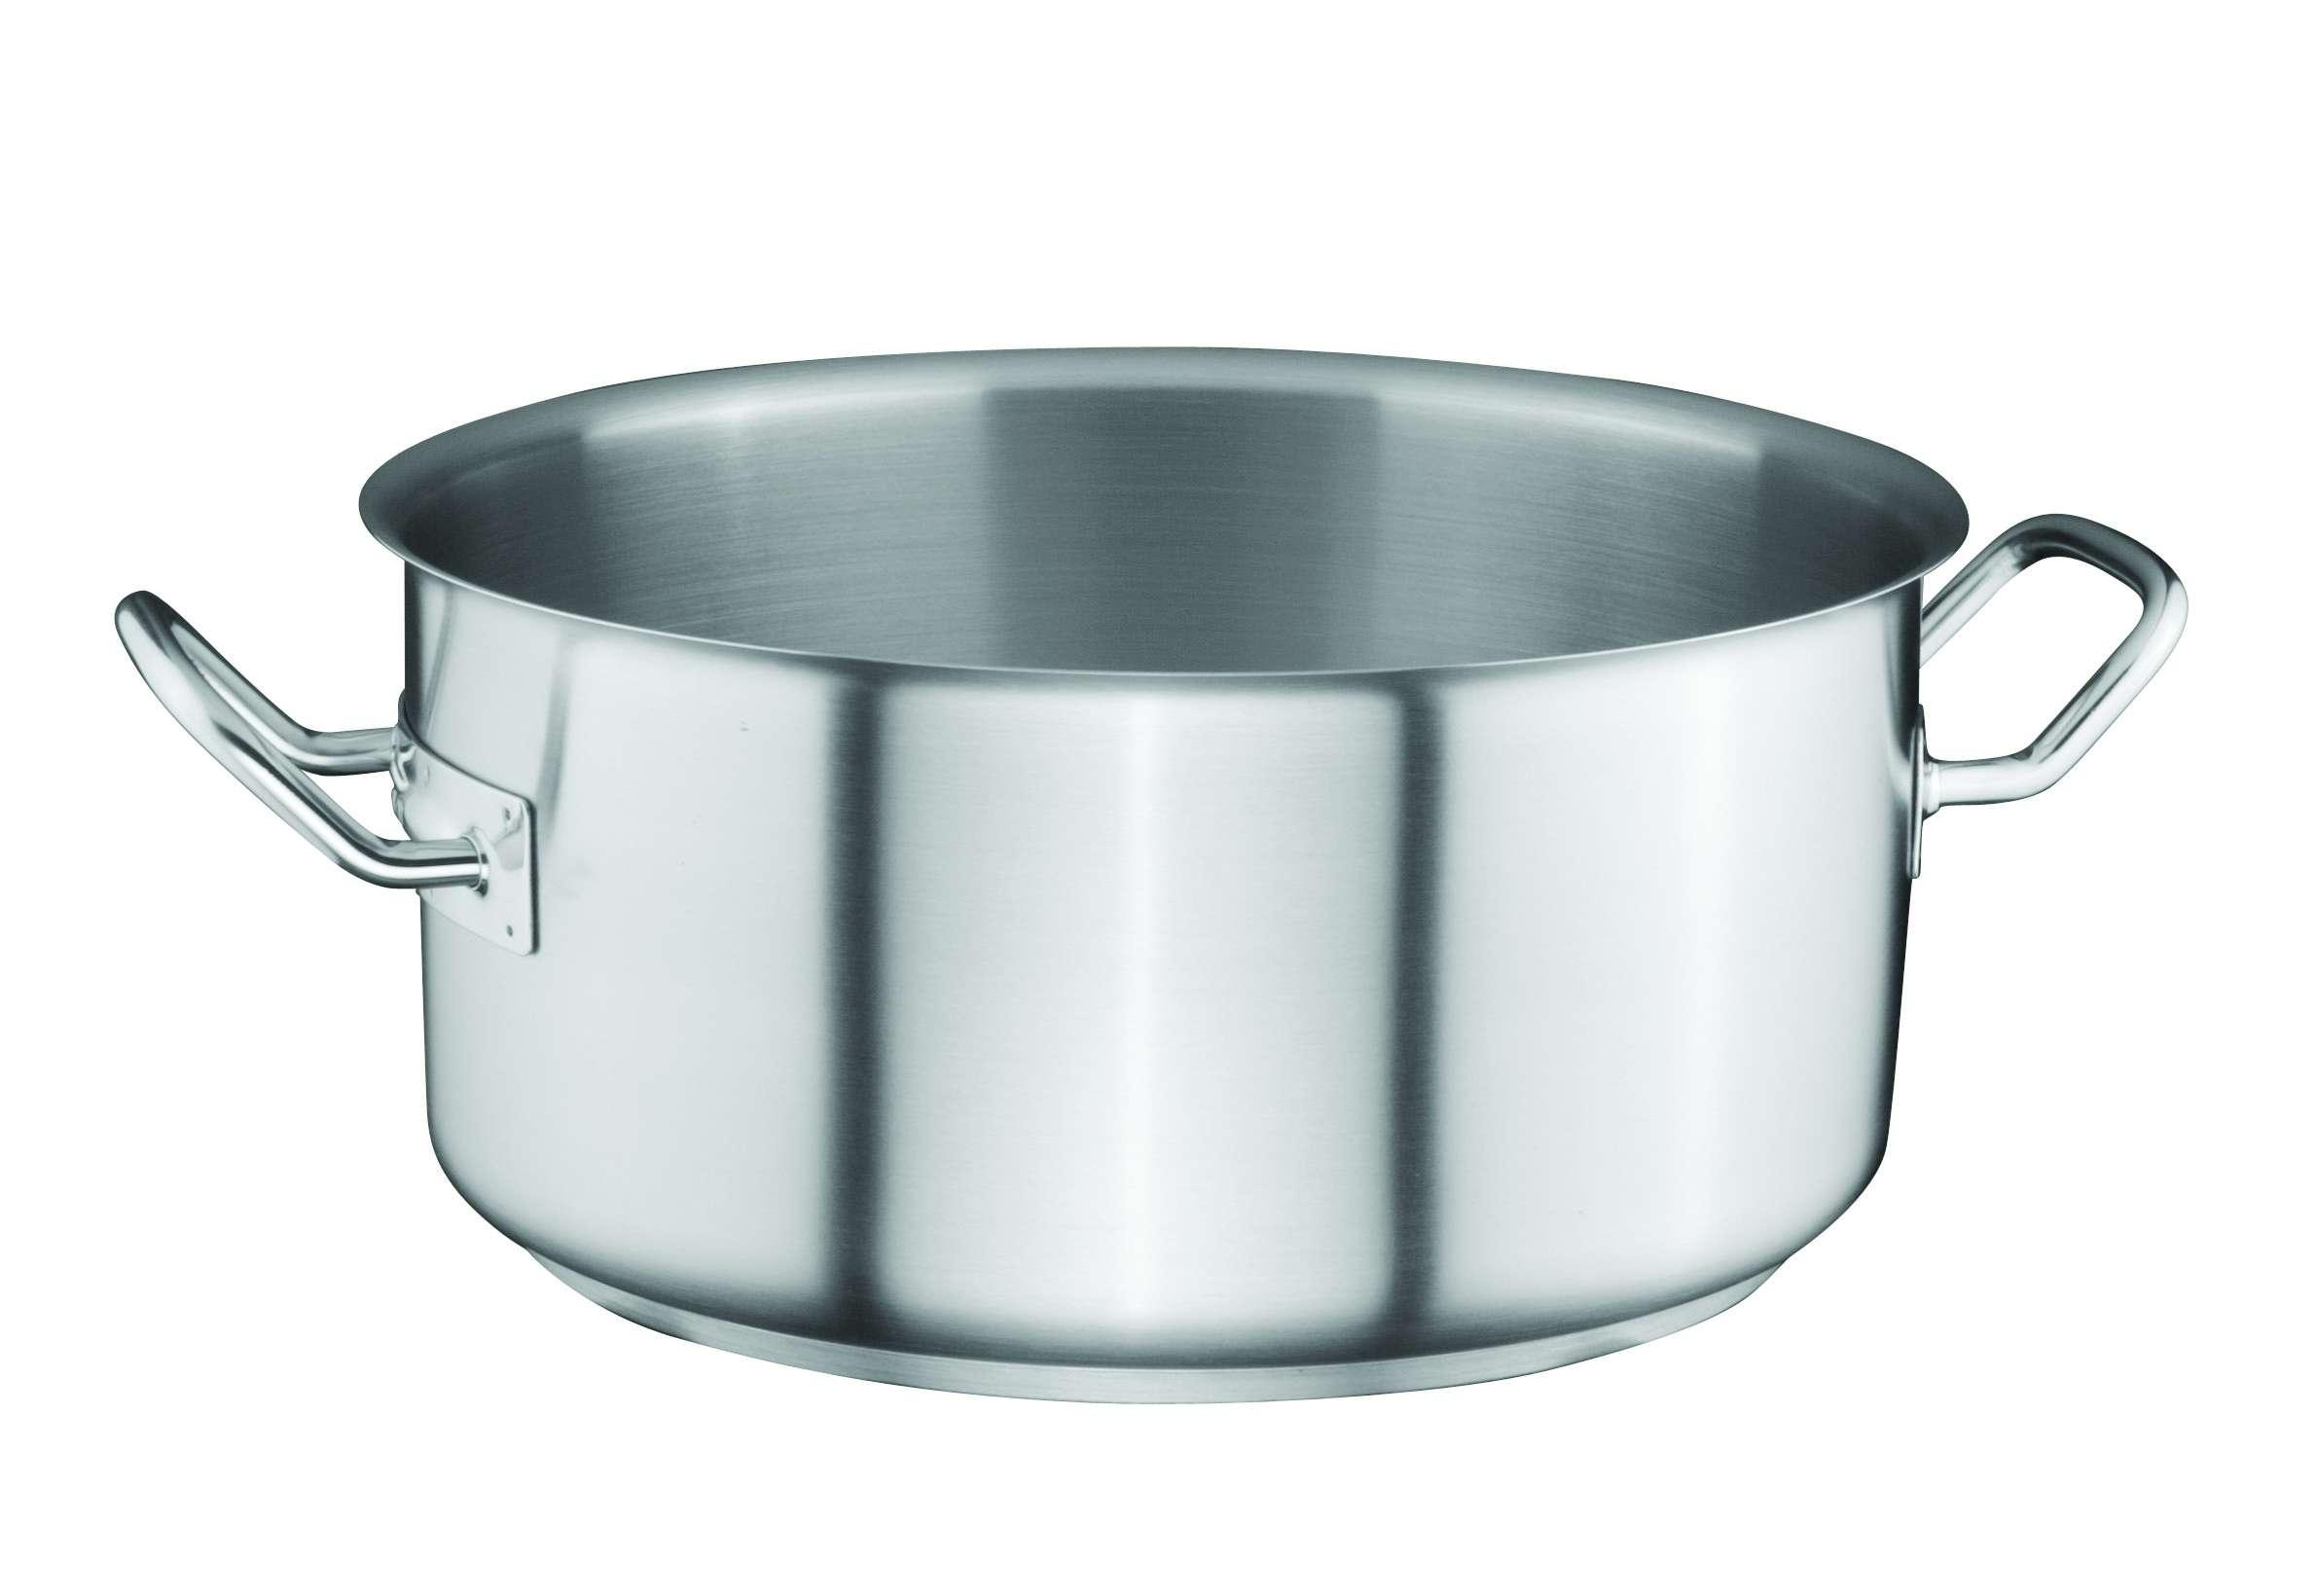 Ozti Stainless Steel Casserole Pot 16 cm x 7.5 cm Silver Stainless Steel